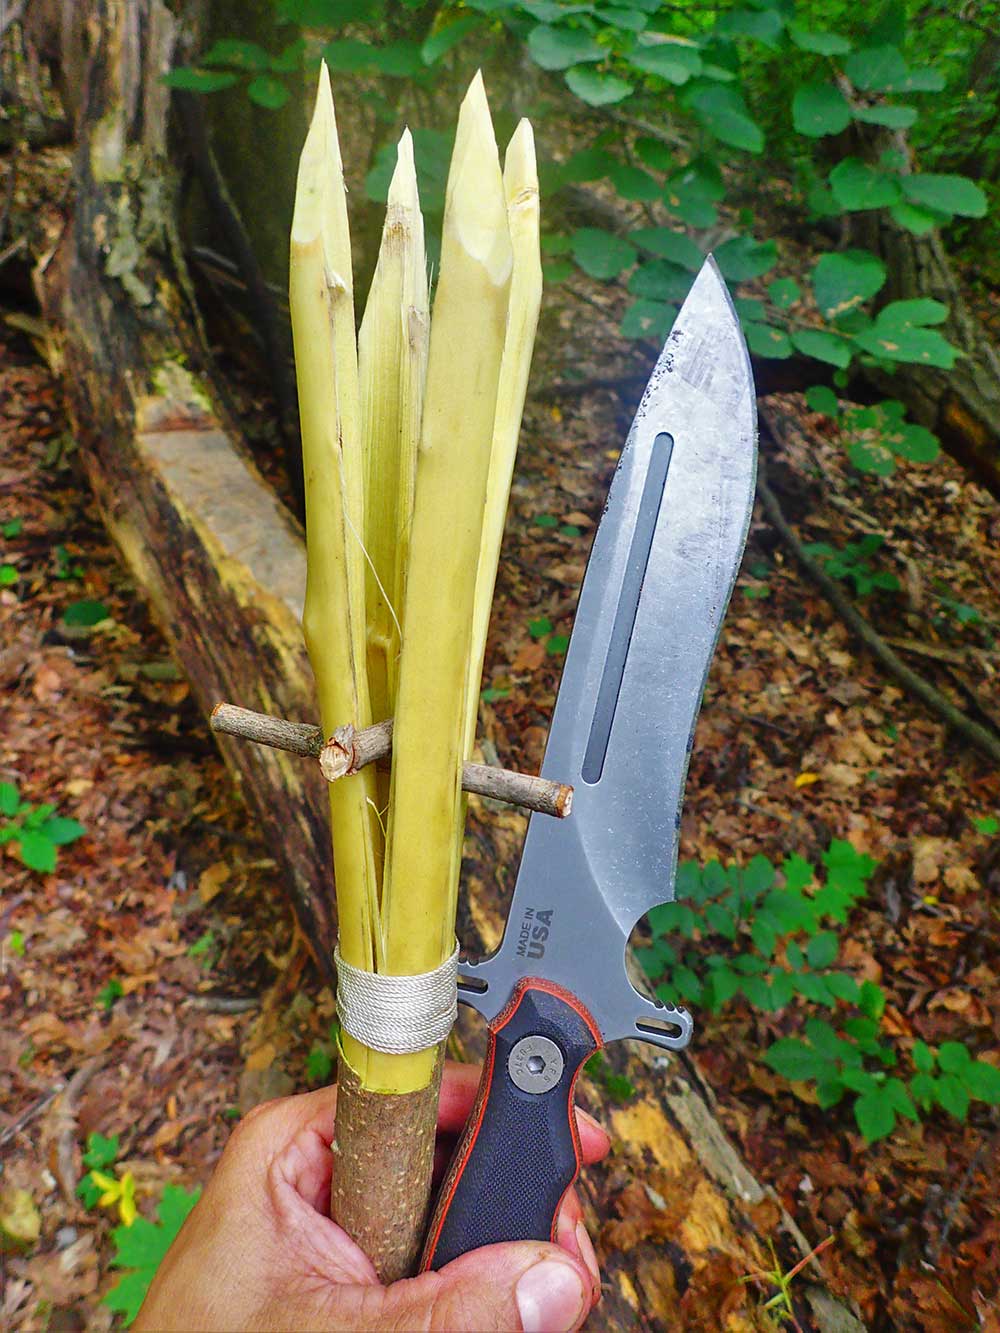 A completed survival frog gigging spear made with the TOPS Operator 7